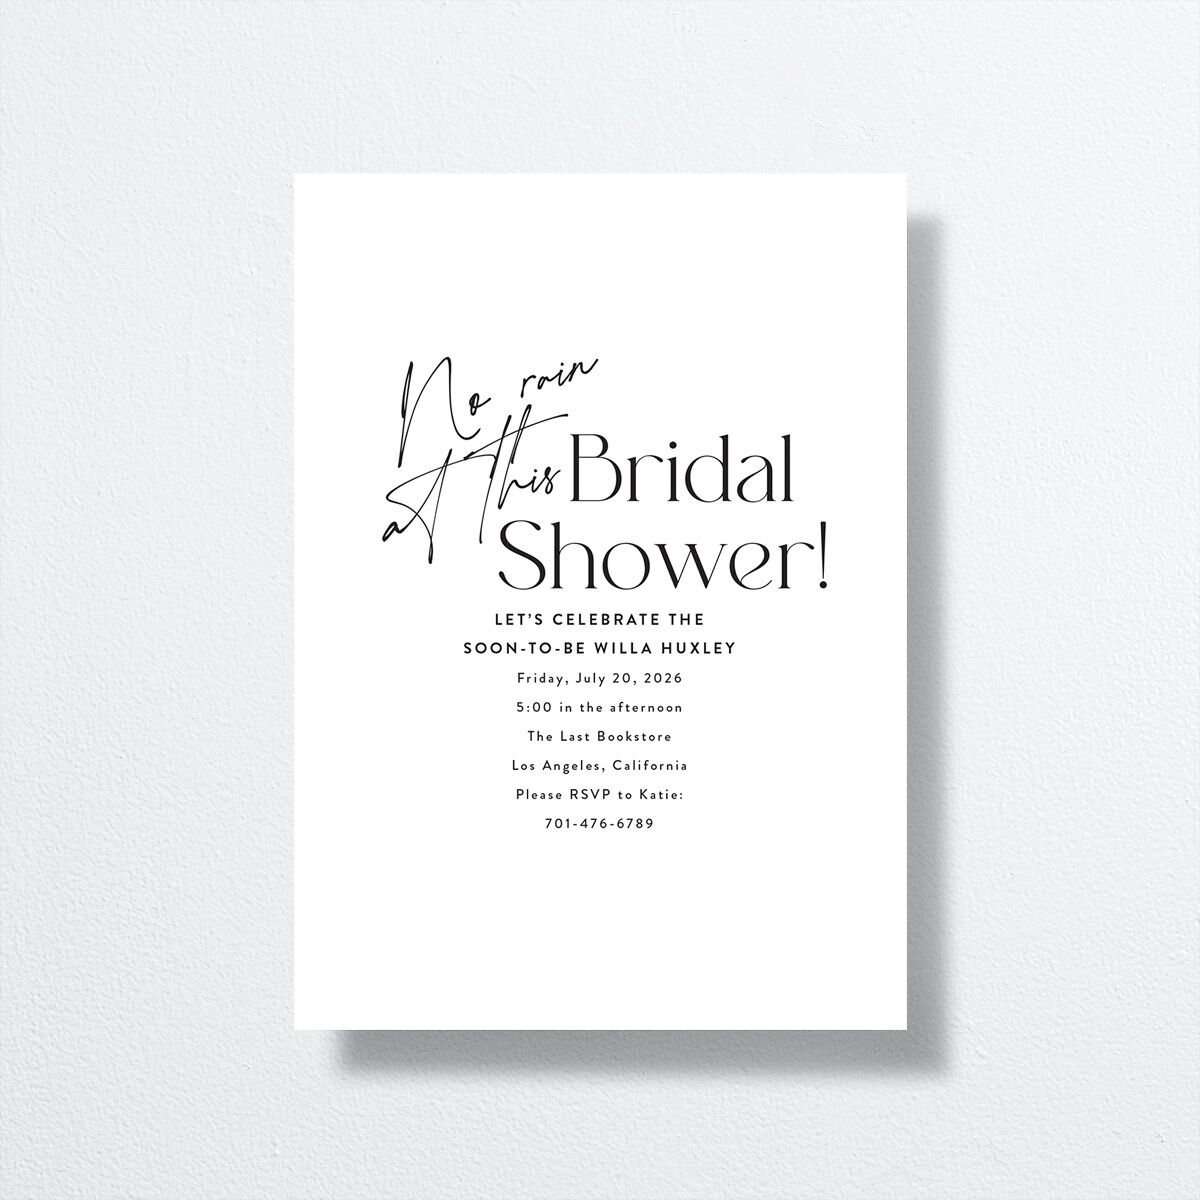 Happy Tears Bridal Shower Invitations front in Black